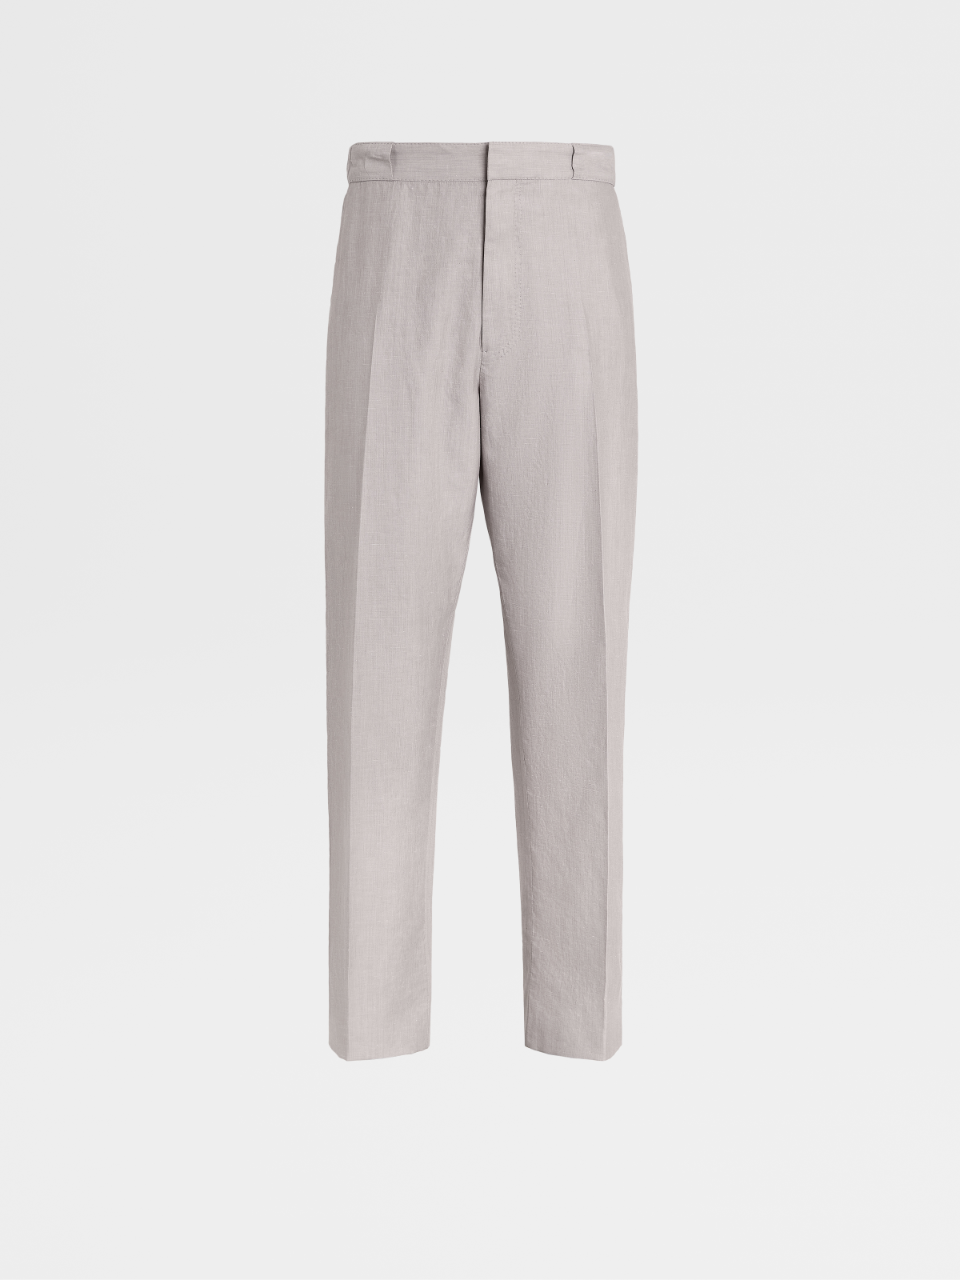 Cotton Linen and Silk Joggers